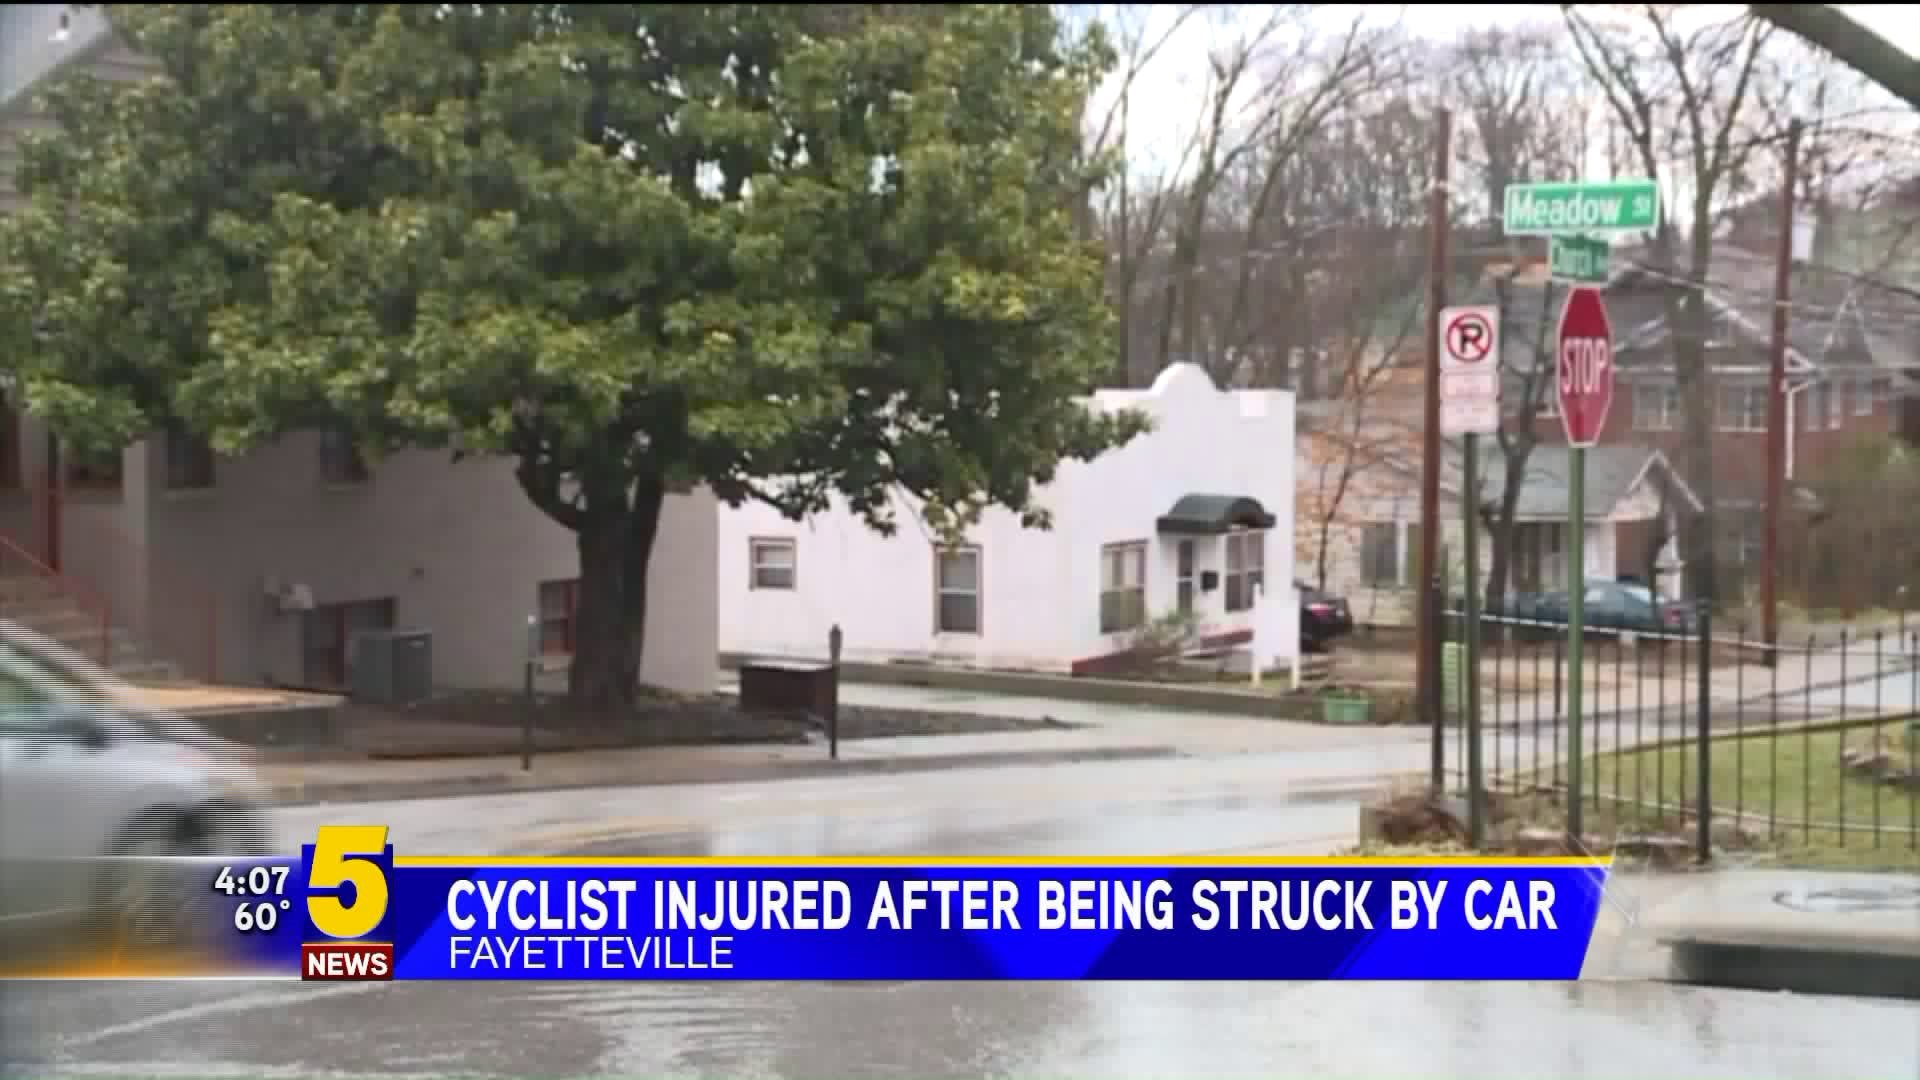 Cyclist Injured After Being Struck by Car